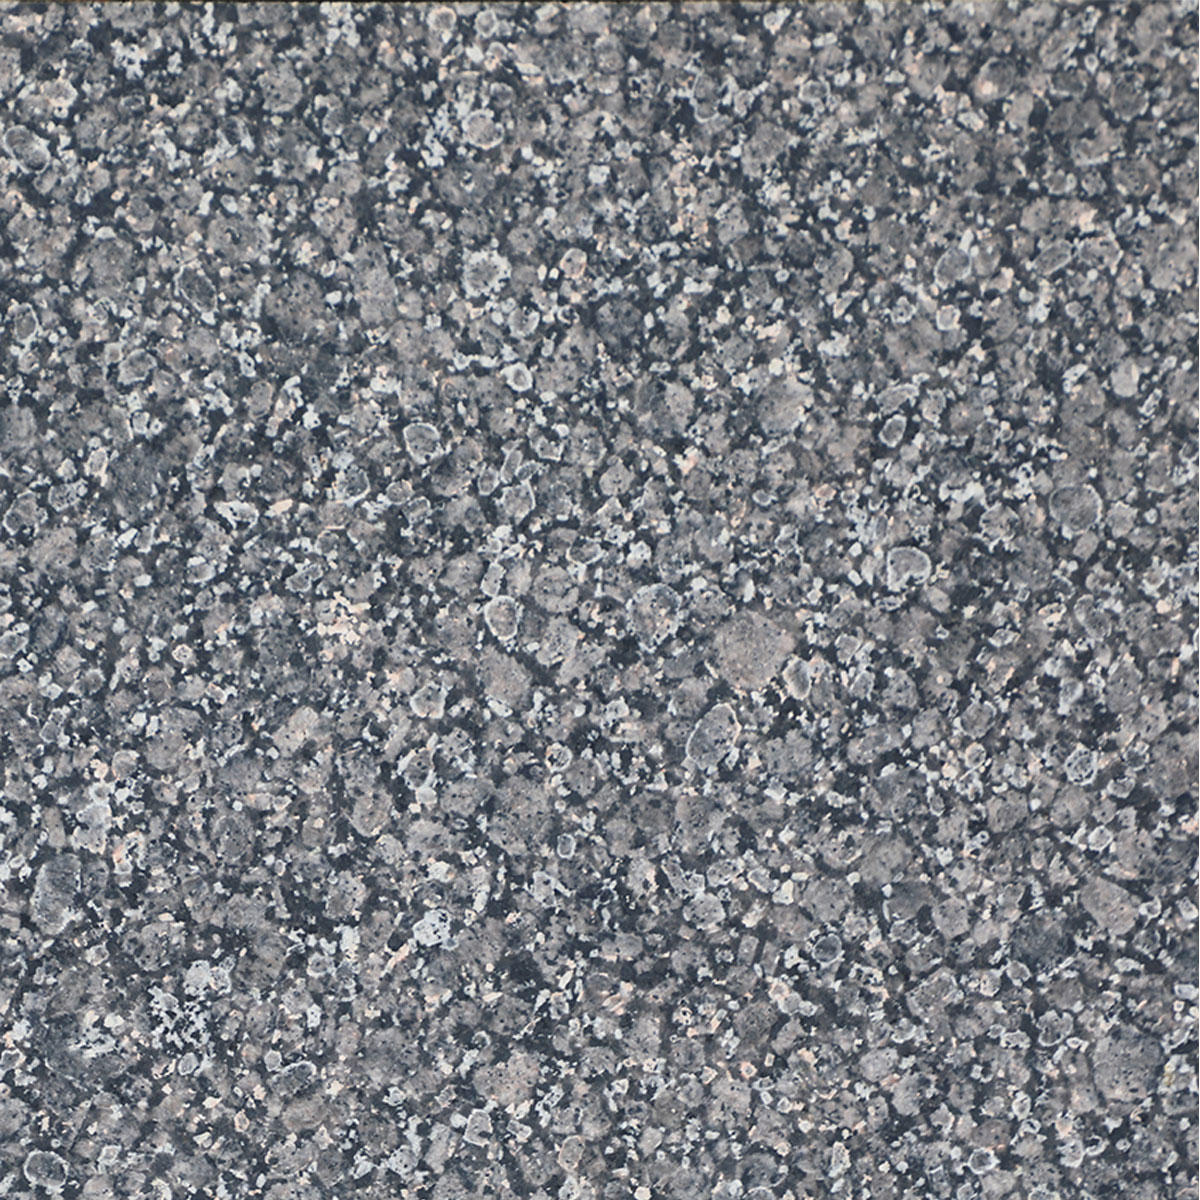 static/products/marbleSlabs/products/GB14.jpg 